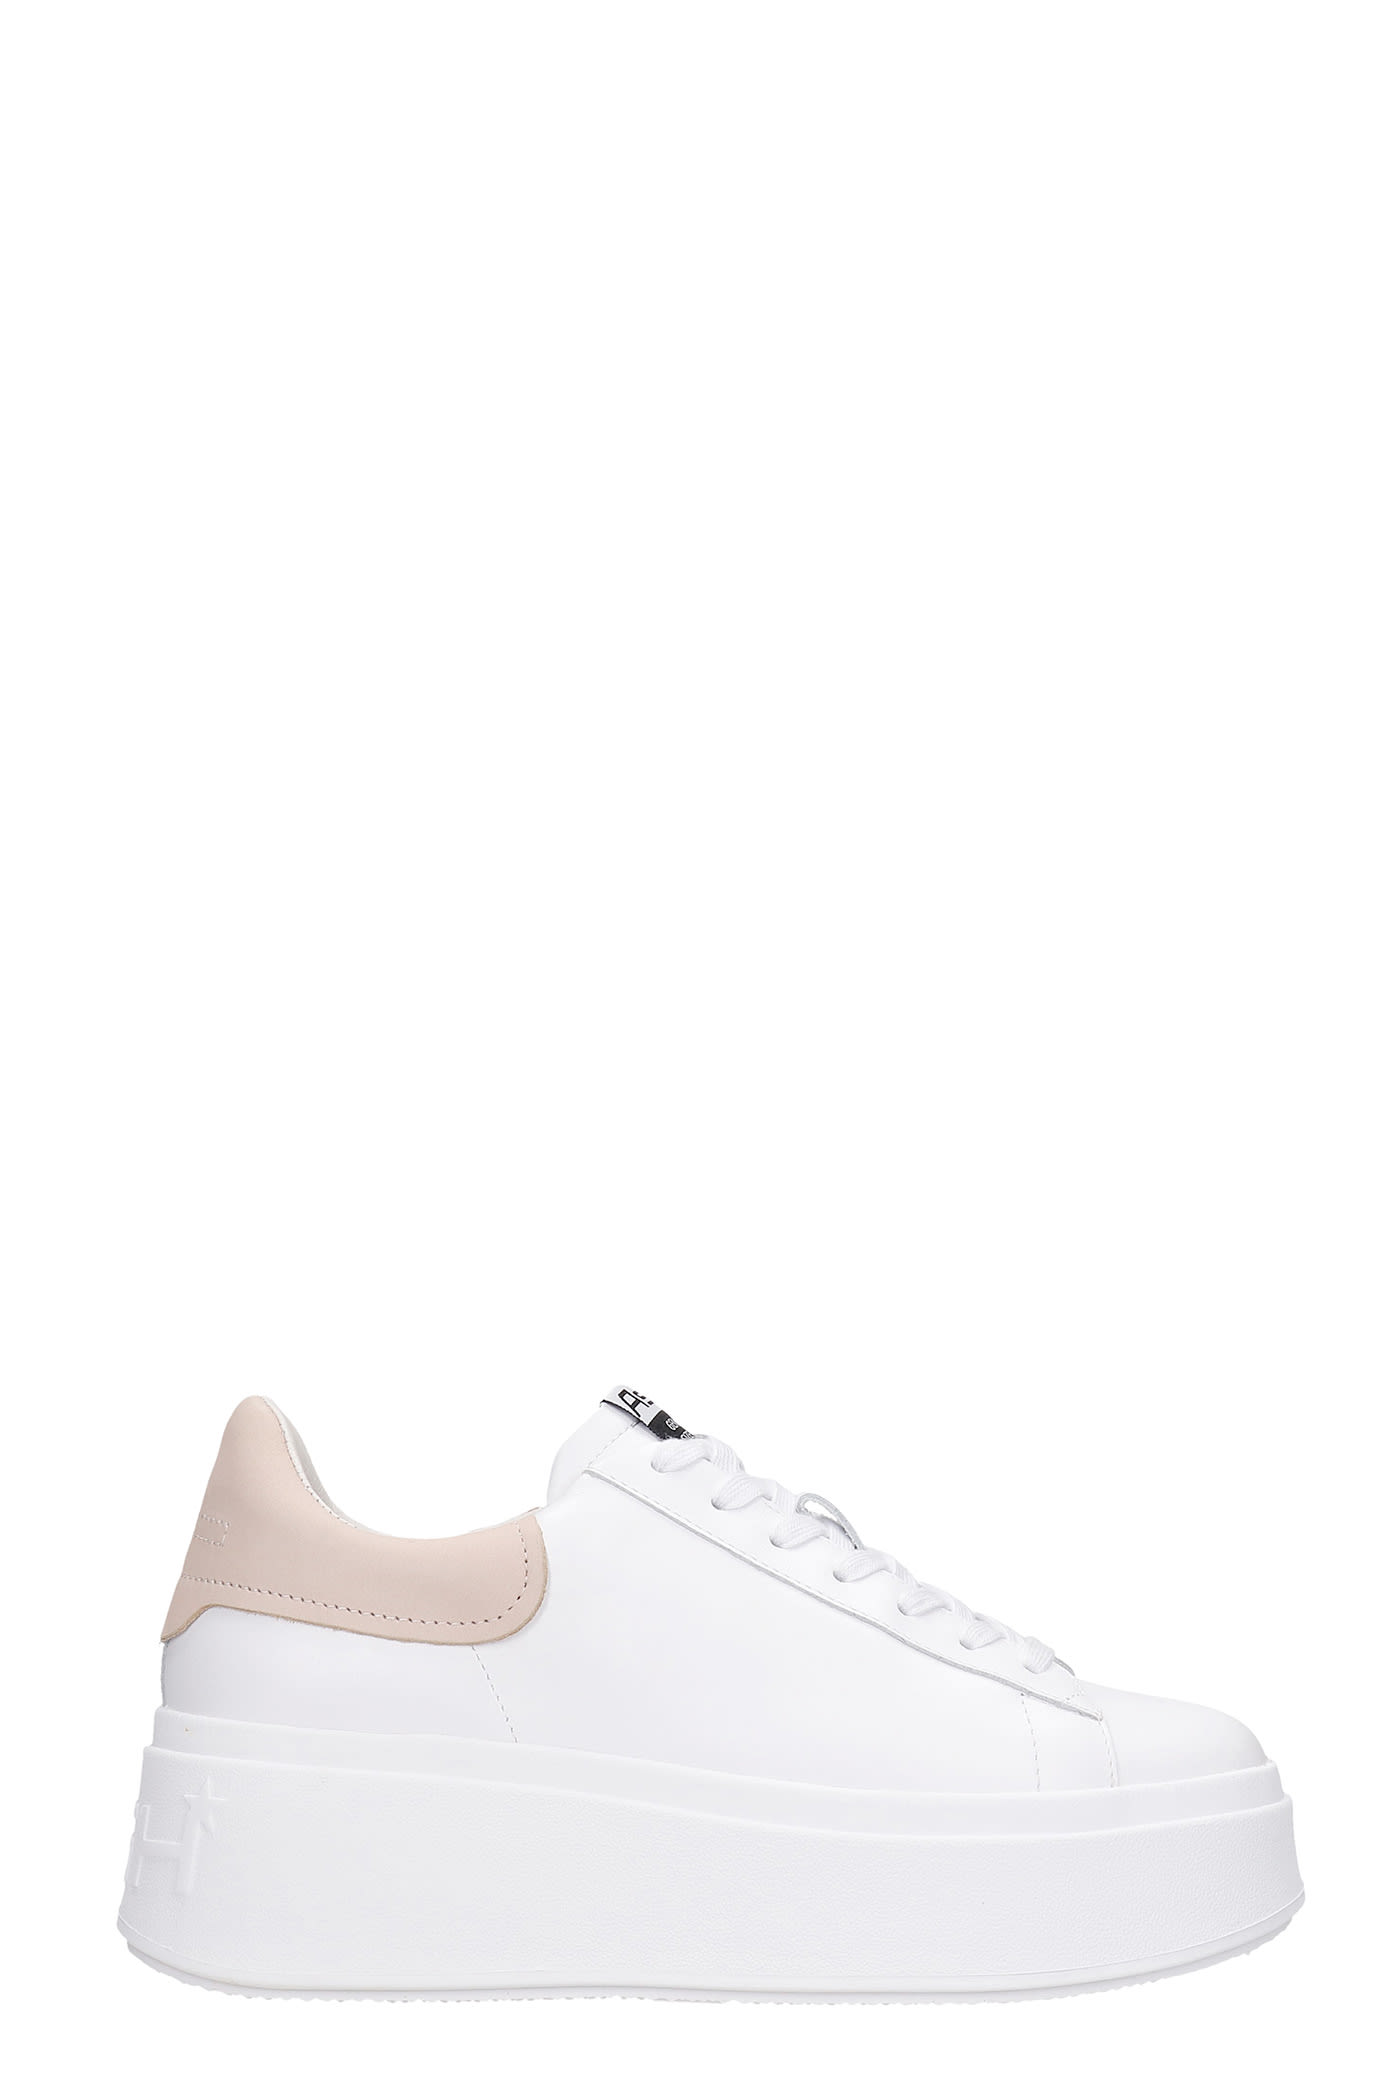 Ash Moby 03 Sneakers In White Leather